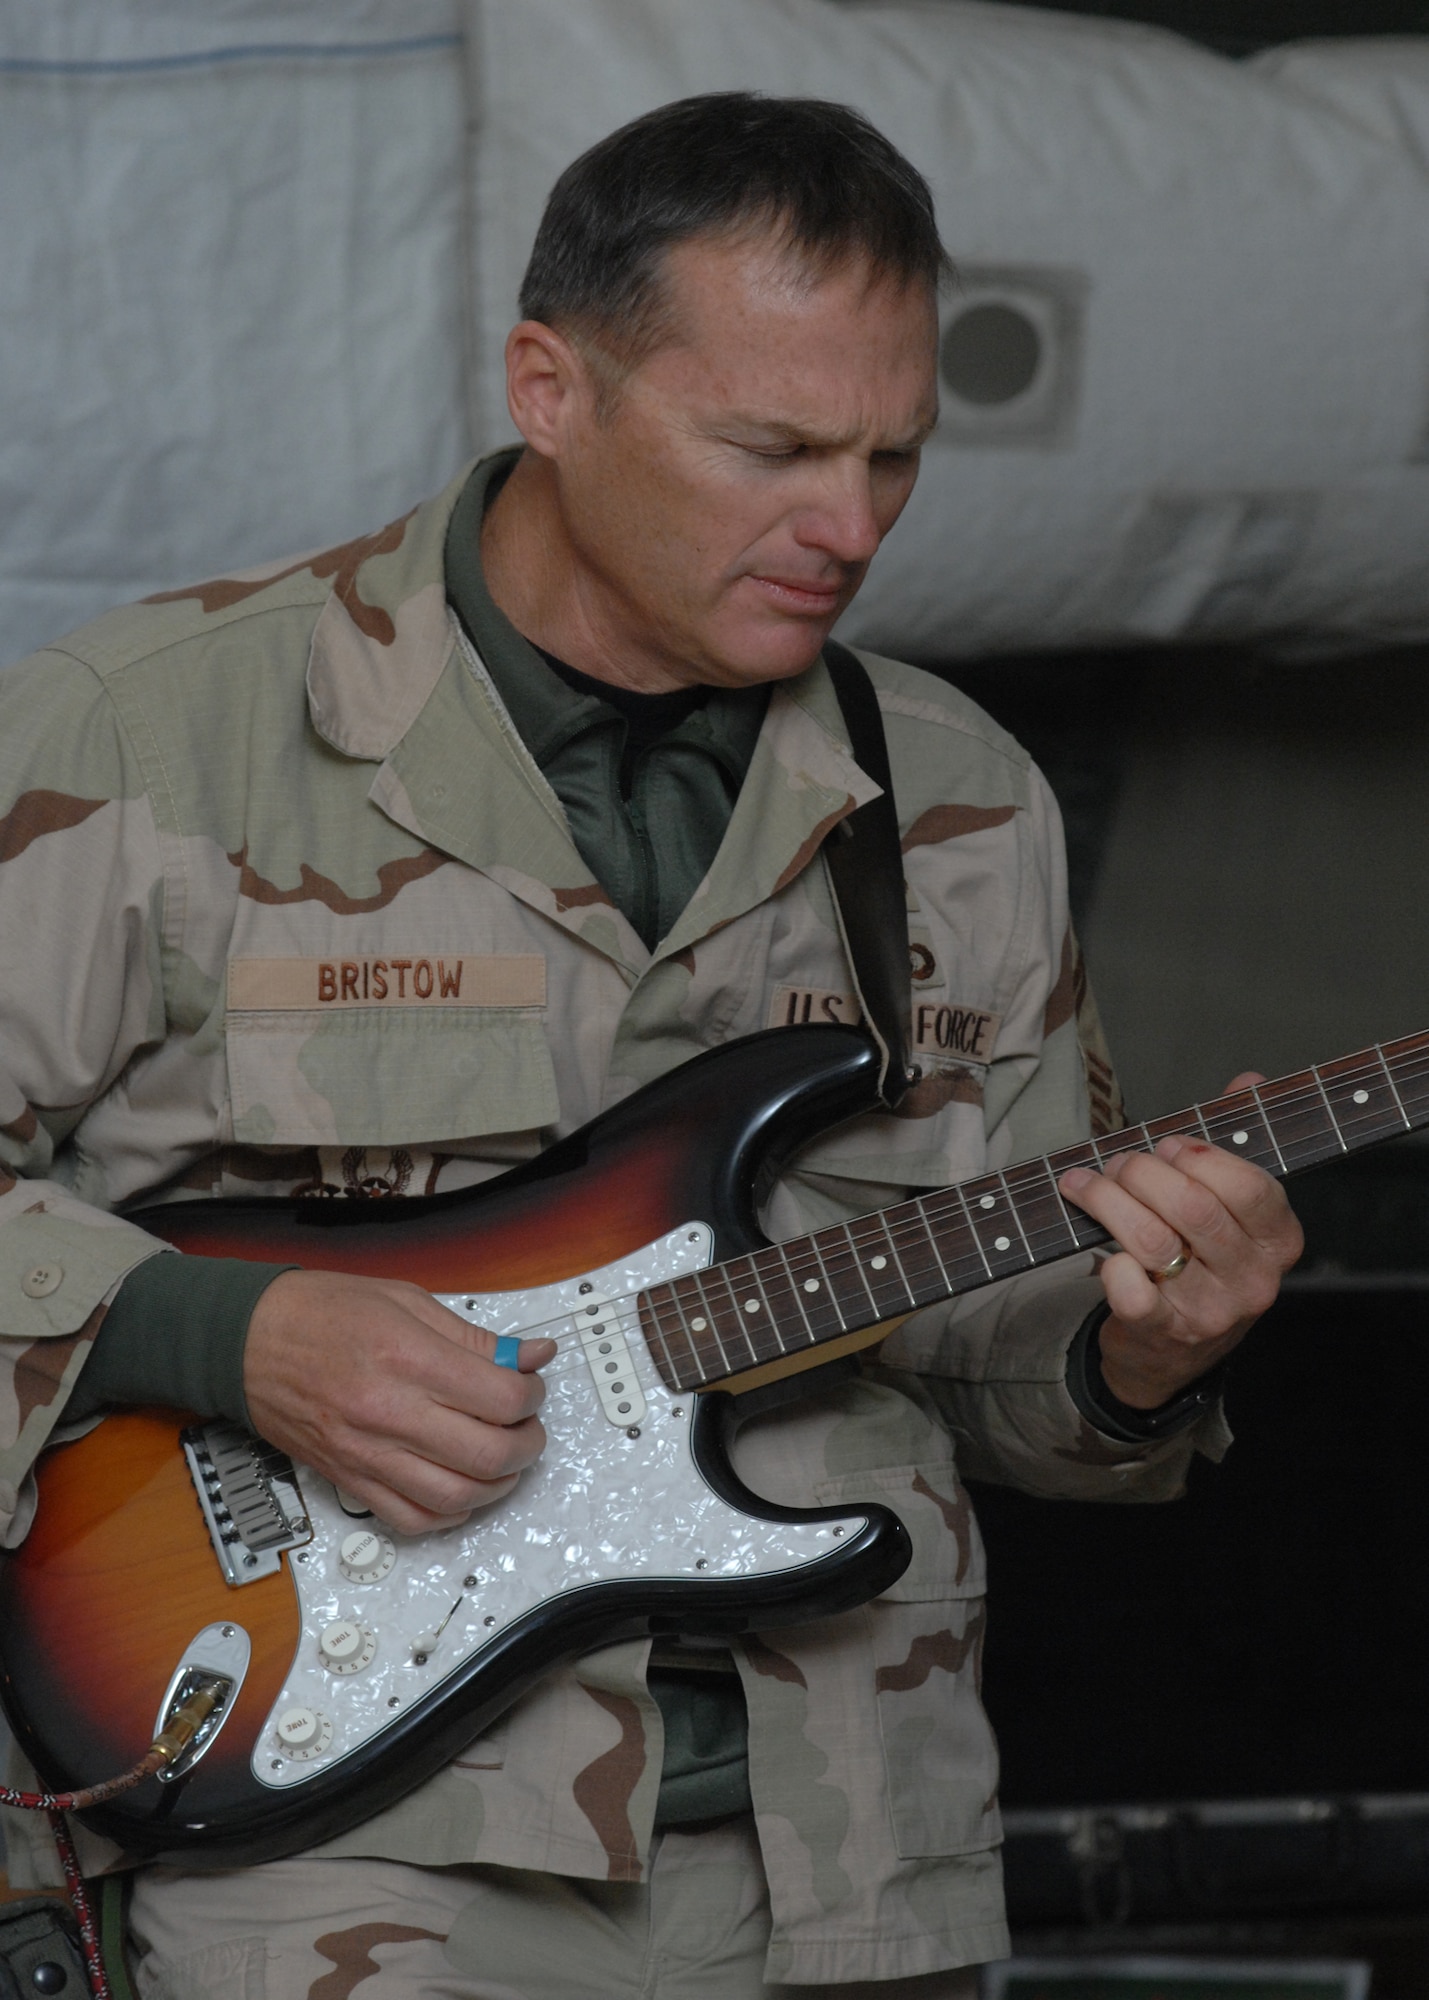 BAGRAM AIR BASE, Afghanistan - Senior Master Sgt. James Bristow, 'Live Round' guitarist and vocalist, brings his guitar to life during the band's performance here Feb. 24.  'Live Round' is the U.S. Air Forces Central band that performs for servicemen and women and local communities throughout Southwest Asia. (U.S. Air Force photo by Master Sgt. Demetrius Lester)